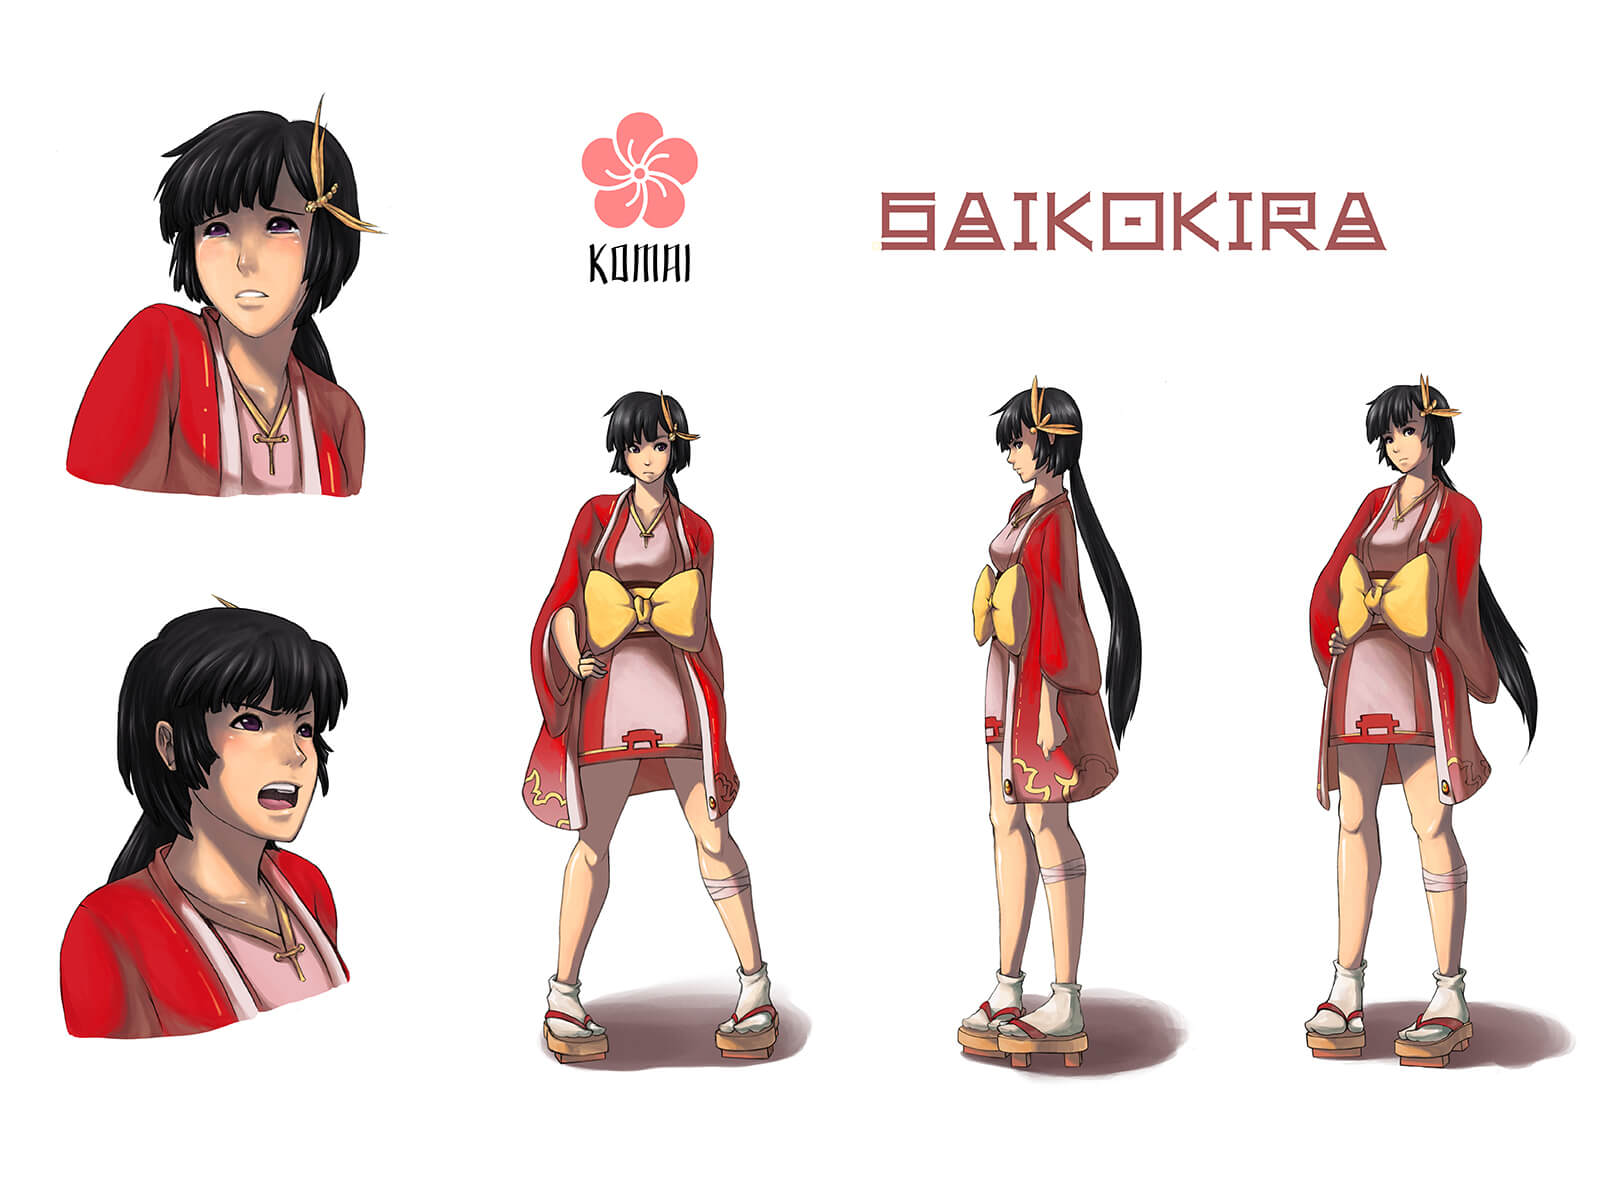 Concept art turnaround of a woman named Komai in various poses wearing short, red Japanese garb and geta footwear.